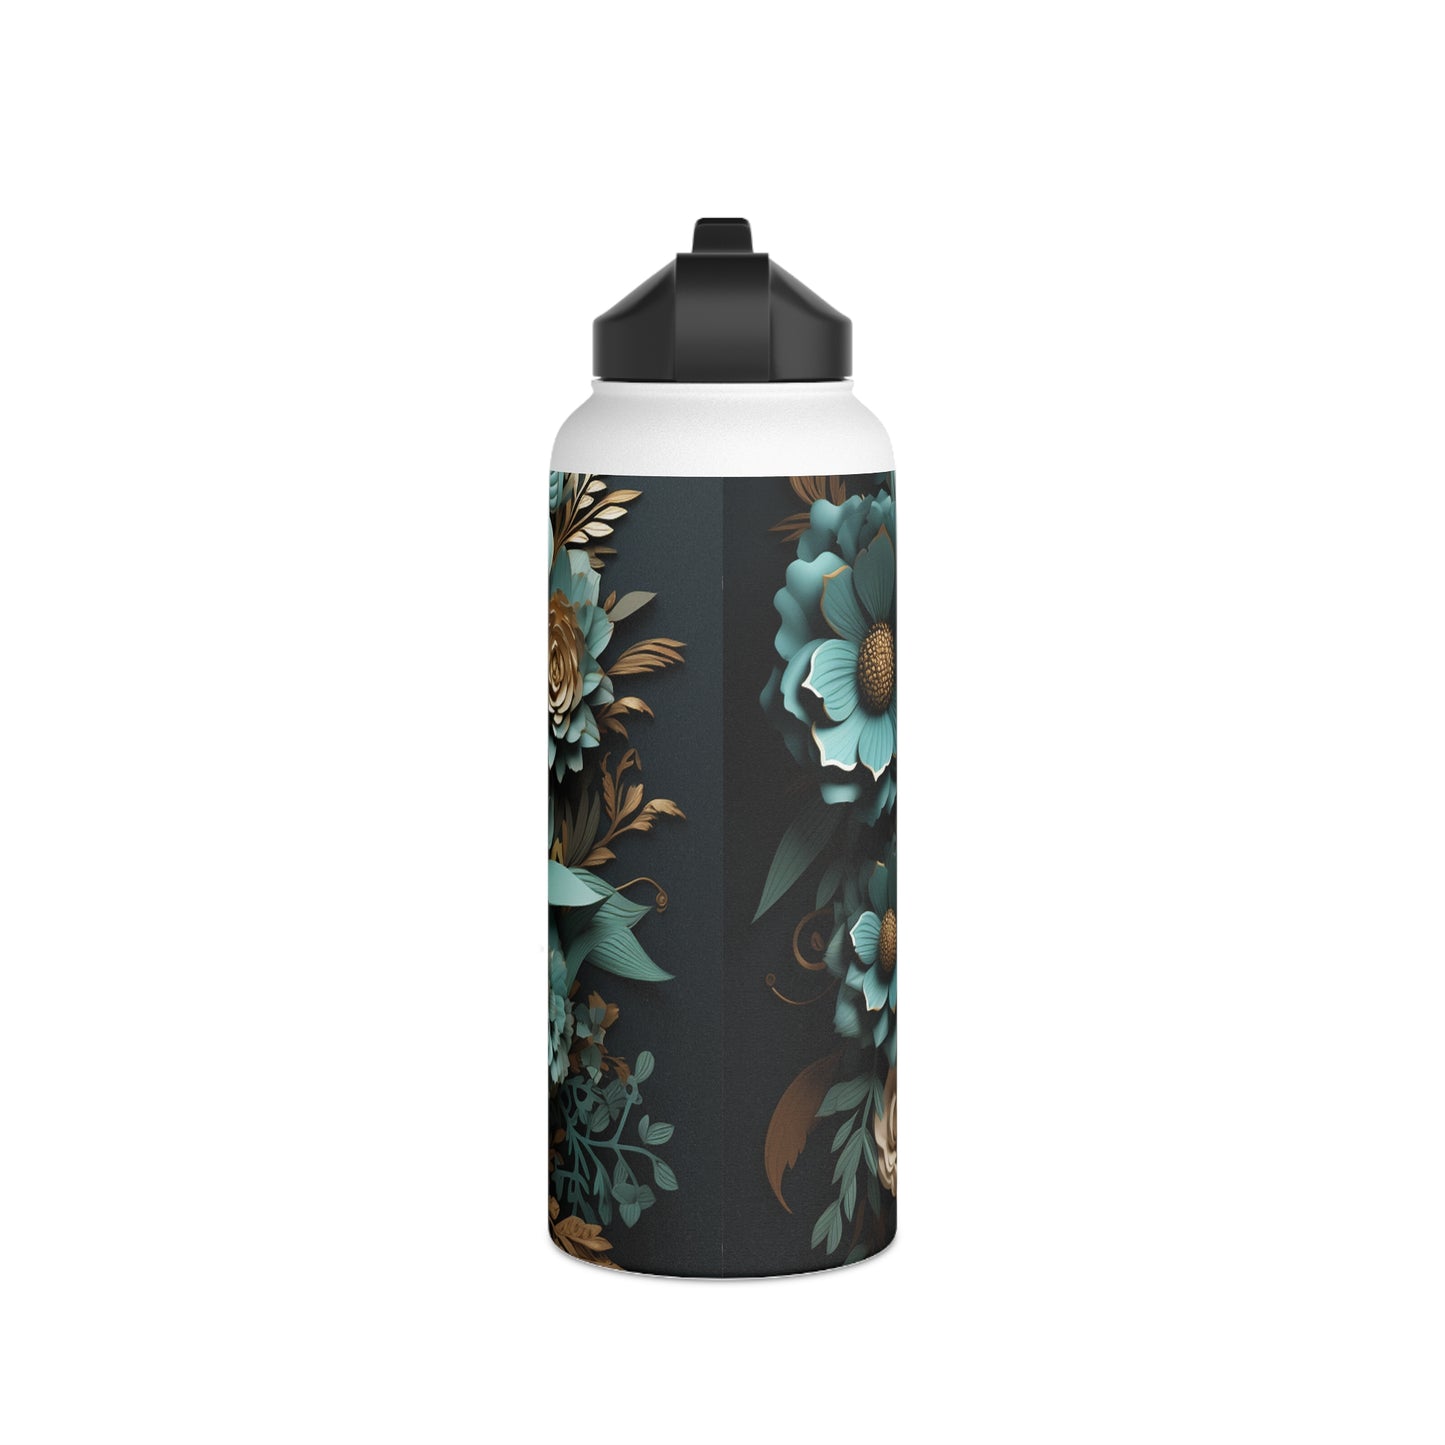 Skull Candy Gold and Teal Stainless Steel Water Bottle, Standard Lid